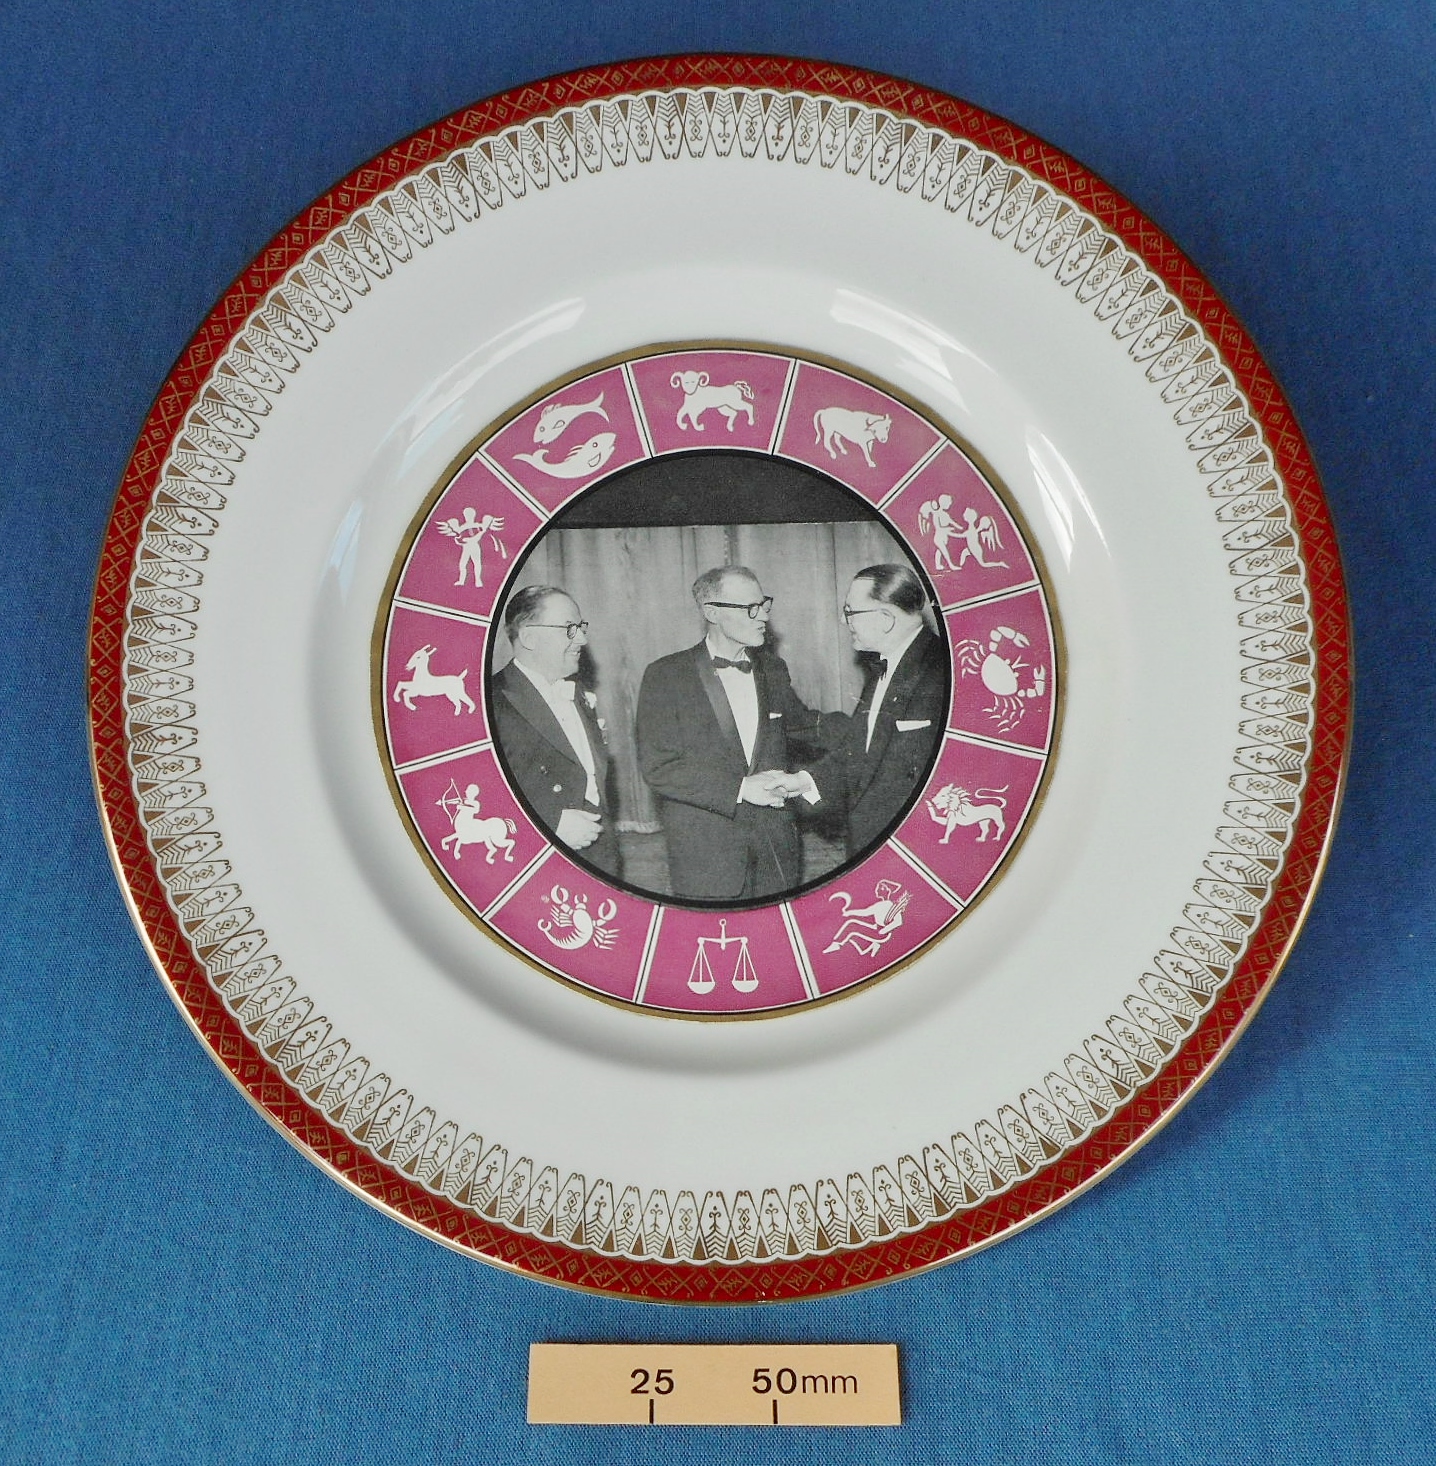 Gift of a plate from Cliff Townsend